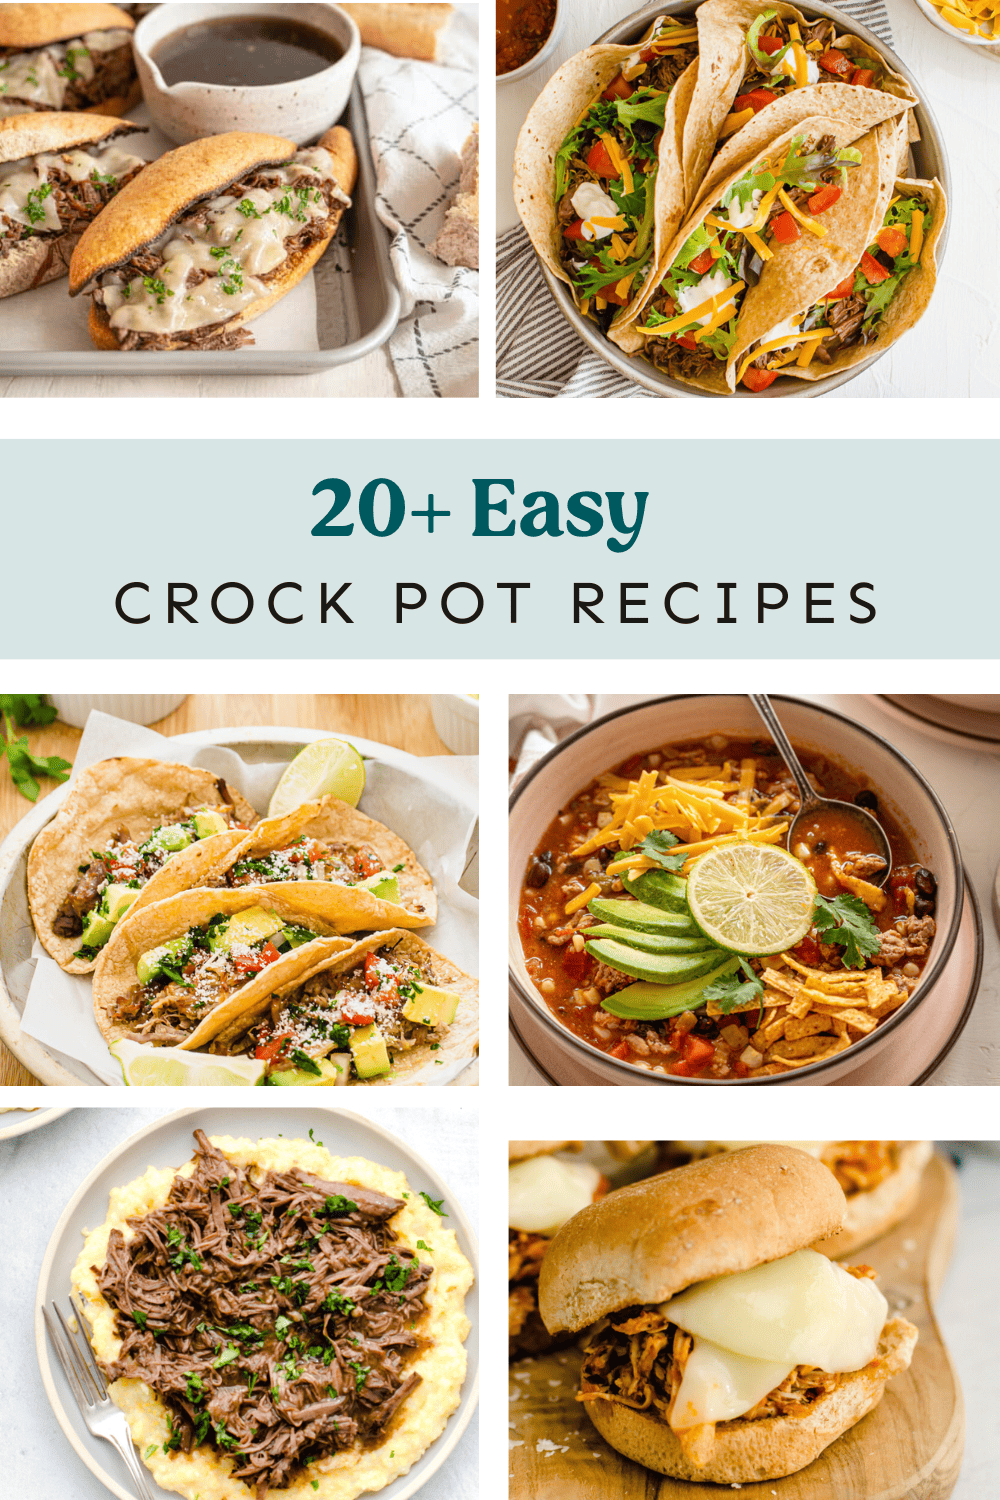 20+ Easy Crock Pot Recipes {Well-Tested & Delicious!}